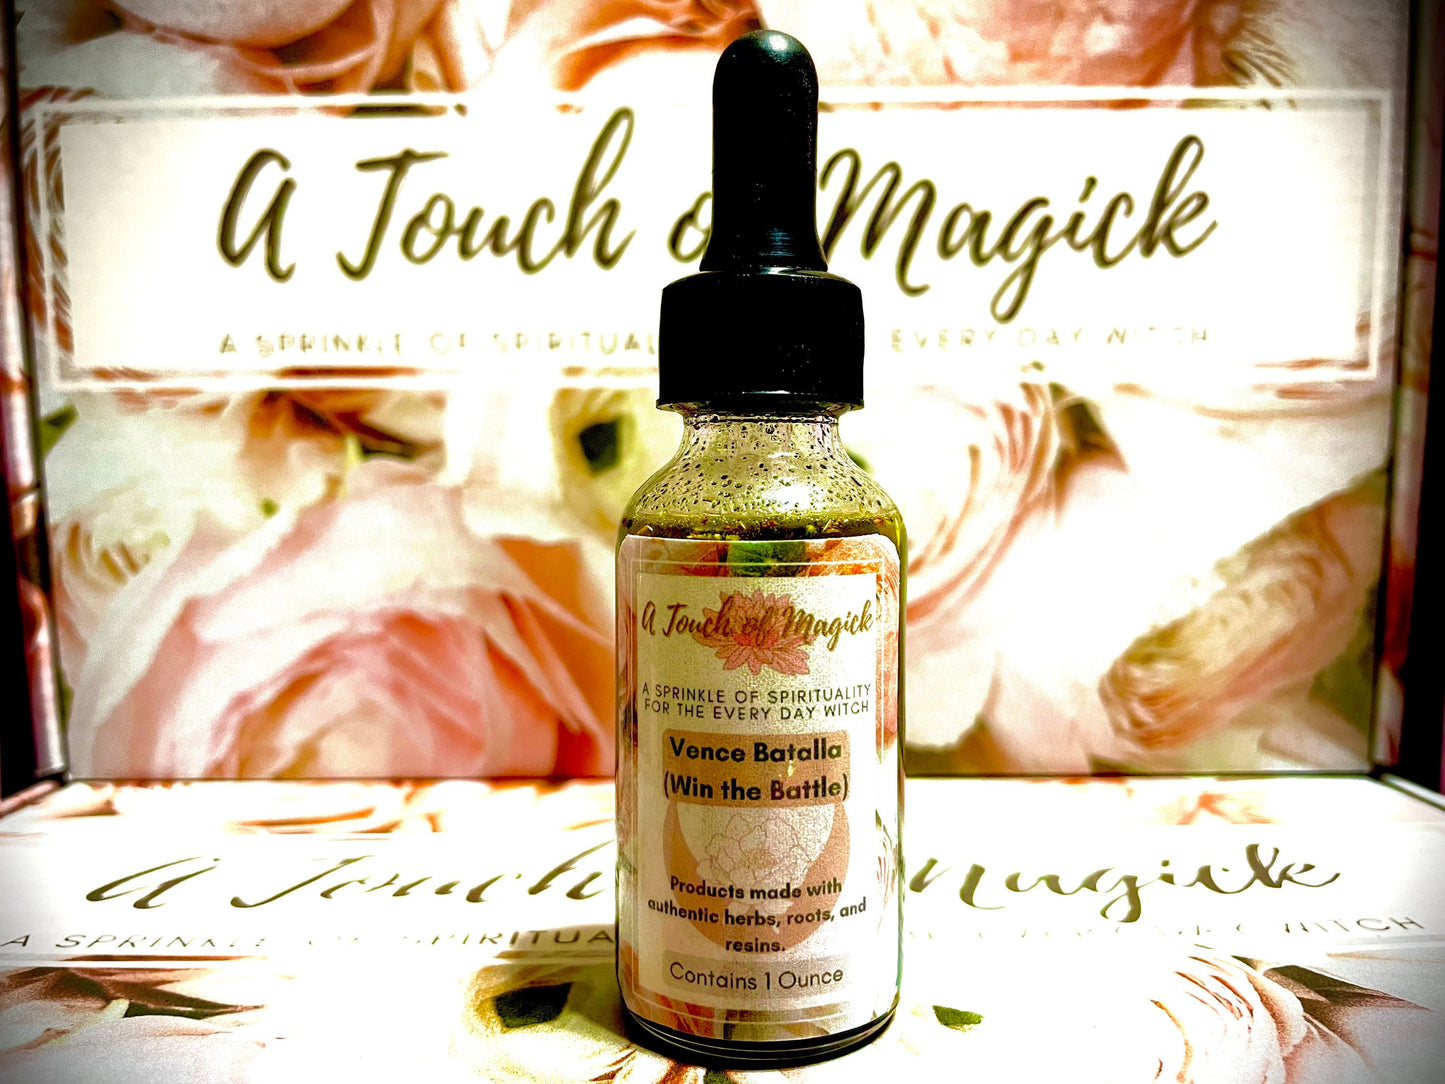 Gypsy Fast Luck Oil - 1 Oz - Made with Herbs, Roots, Resins, Powders & Oils to Manifest your Intentions - Authentic Ingredients